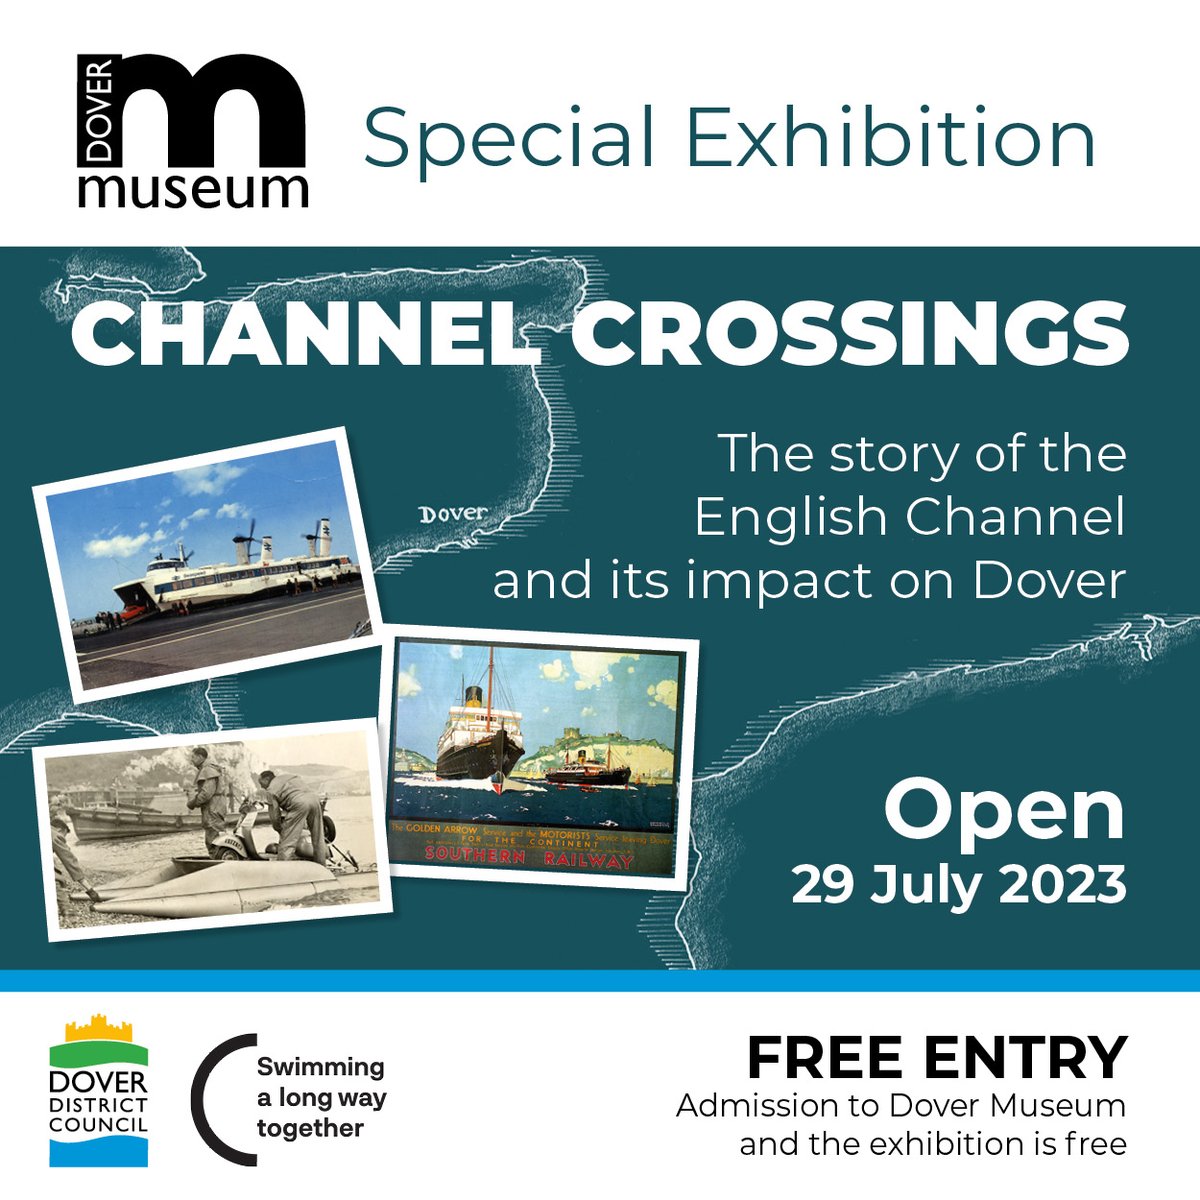 Last chance to see #Dover Museum's Channel Crossings exhibition! The exhibition and gallery will be closed after May 6th for four weeks to prepare for the next #exhibition: Animals Everywhere. More information to follow soon.